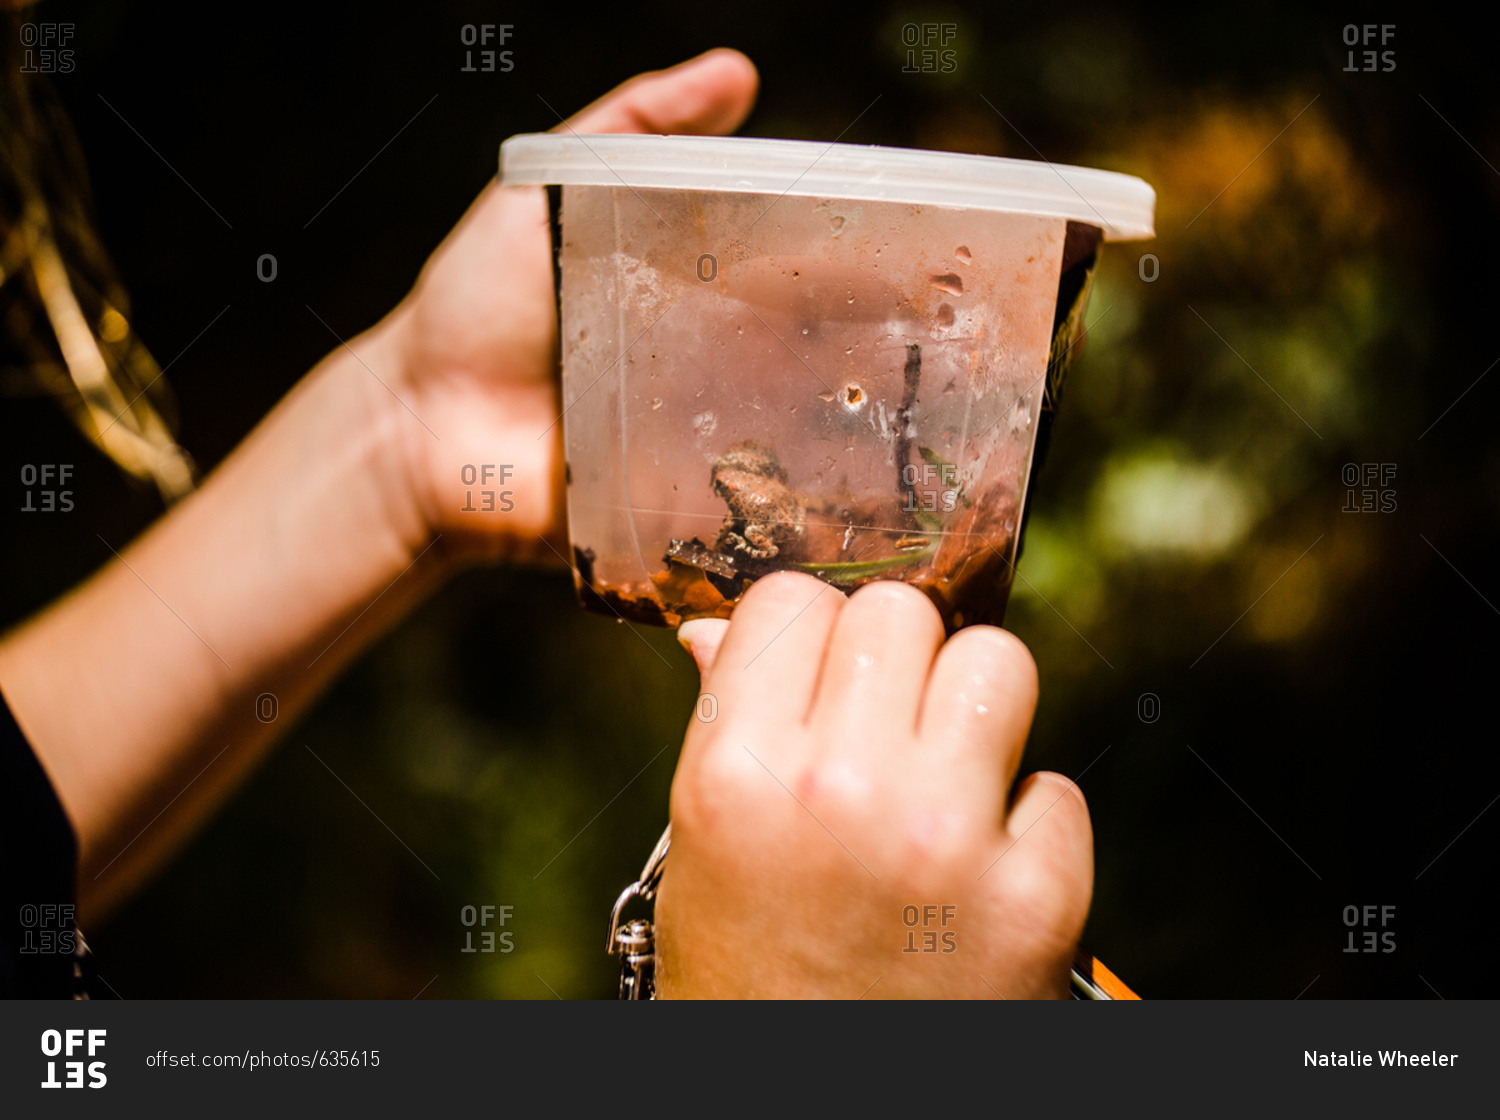 Child holding a red spotted toad in a container